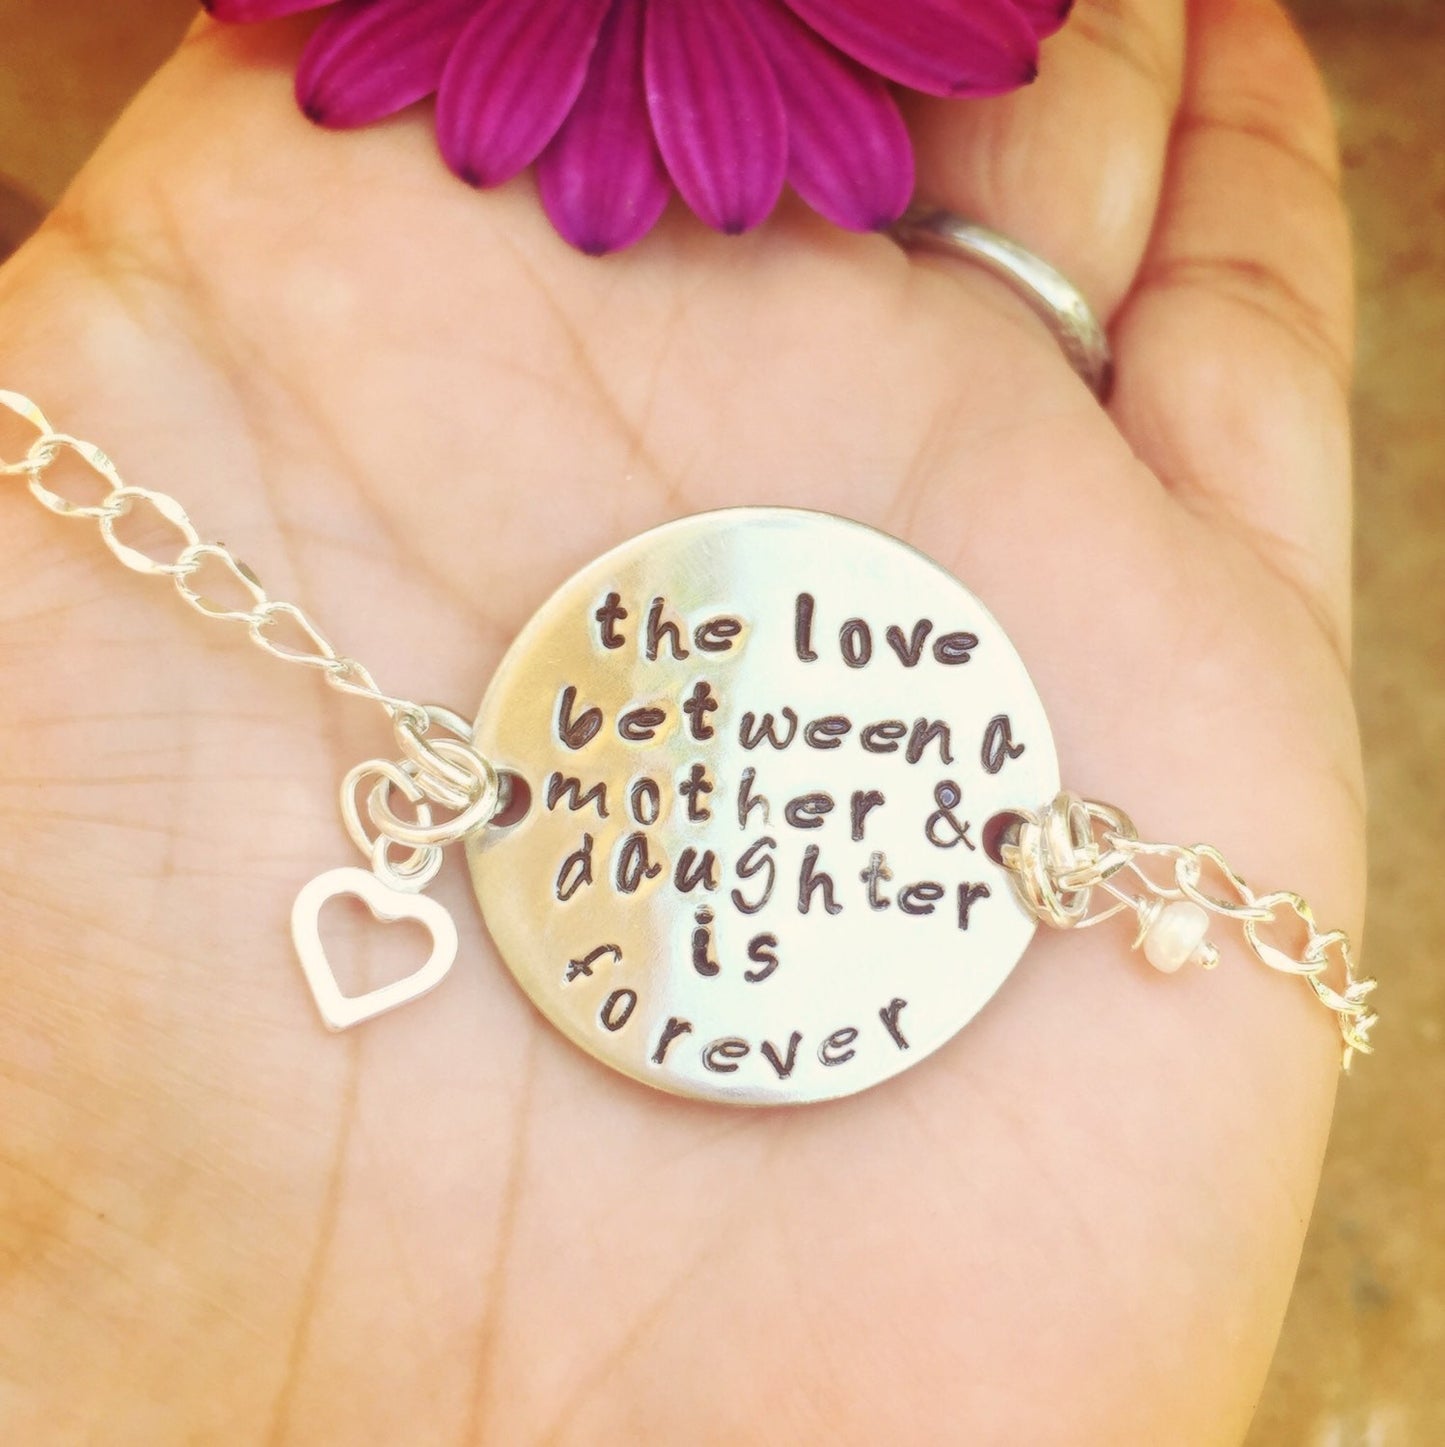 Mother Daughter Bracelet - Natashaaloha, jewelry, bracelets, necklace, keychains, fishing lures, gifts for men, charms, personalized, 